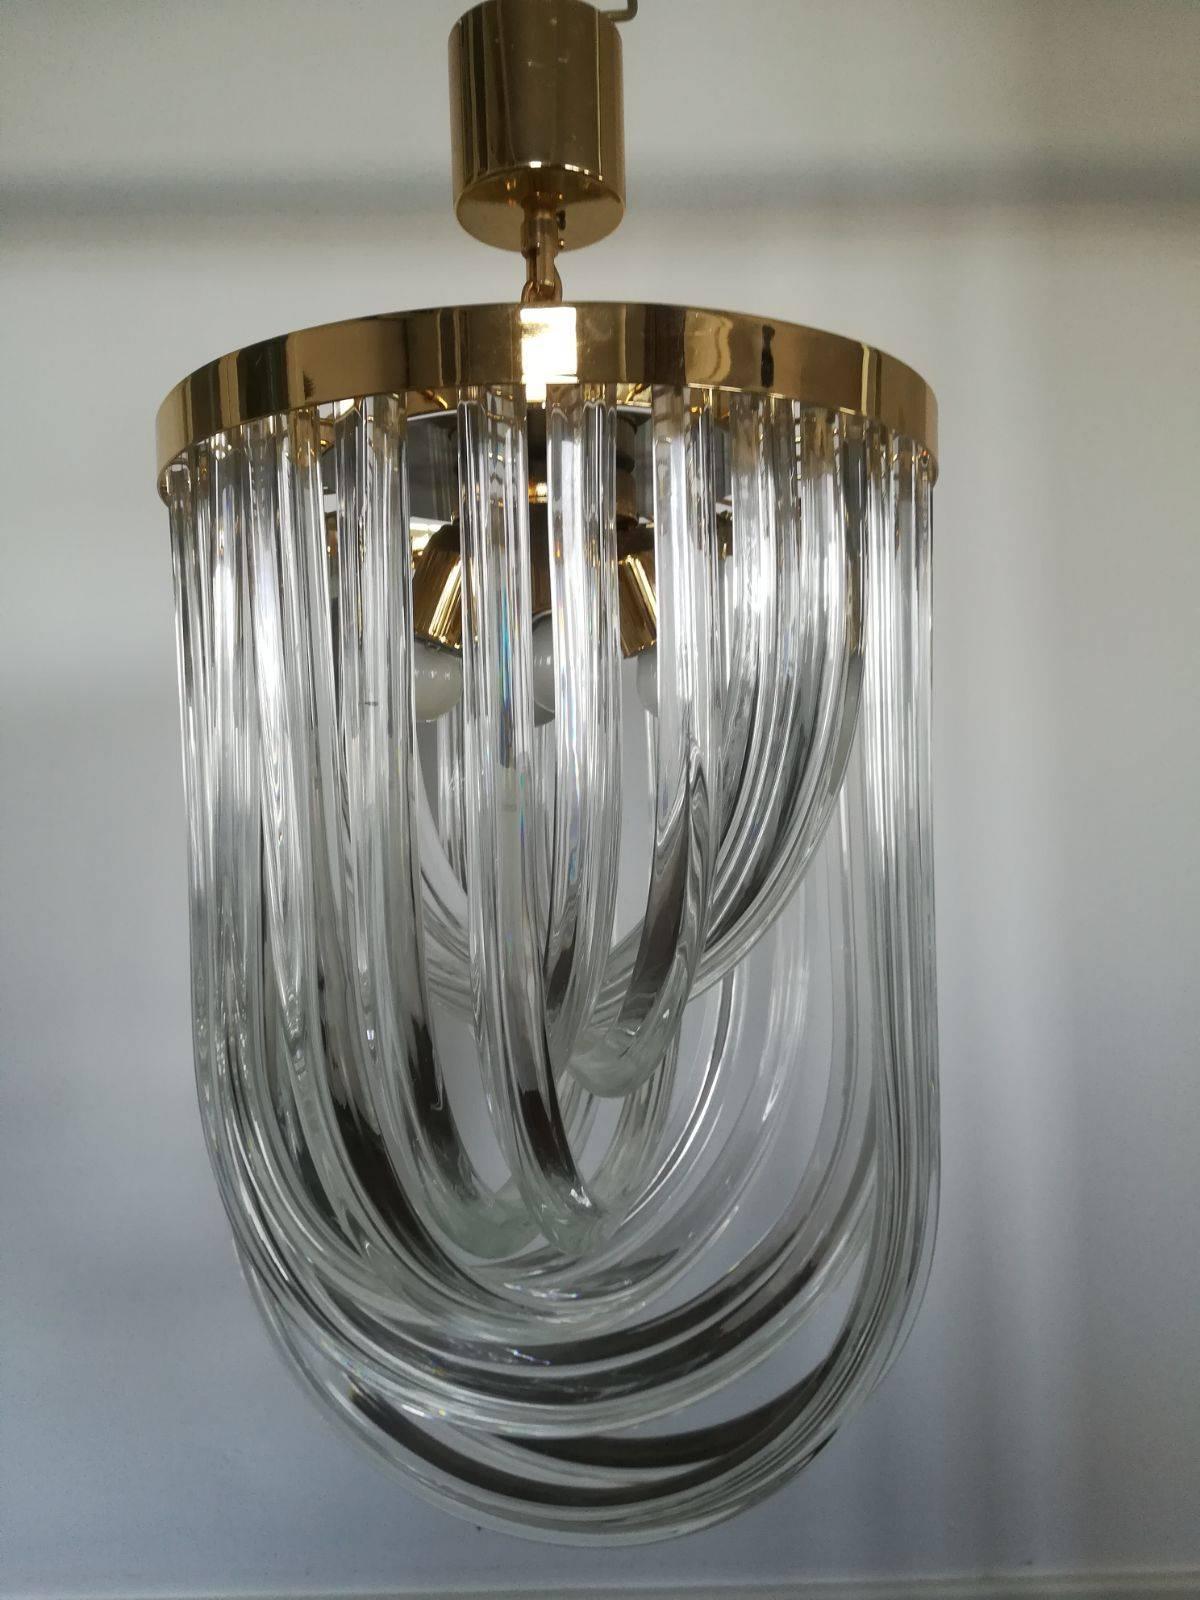 This large Mid-Century Modern chandelier by Paolo Venini features 12 individually handmade and curved Murano Crystal clear glass prisms on a brass frame.

The curved glass prisms reflects the light in a beautiful way, the shape seems to change as